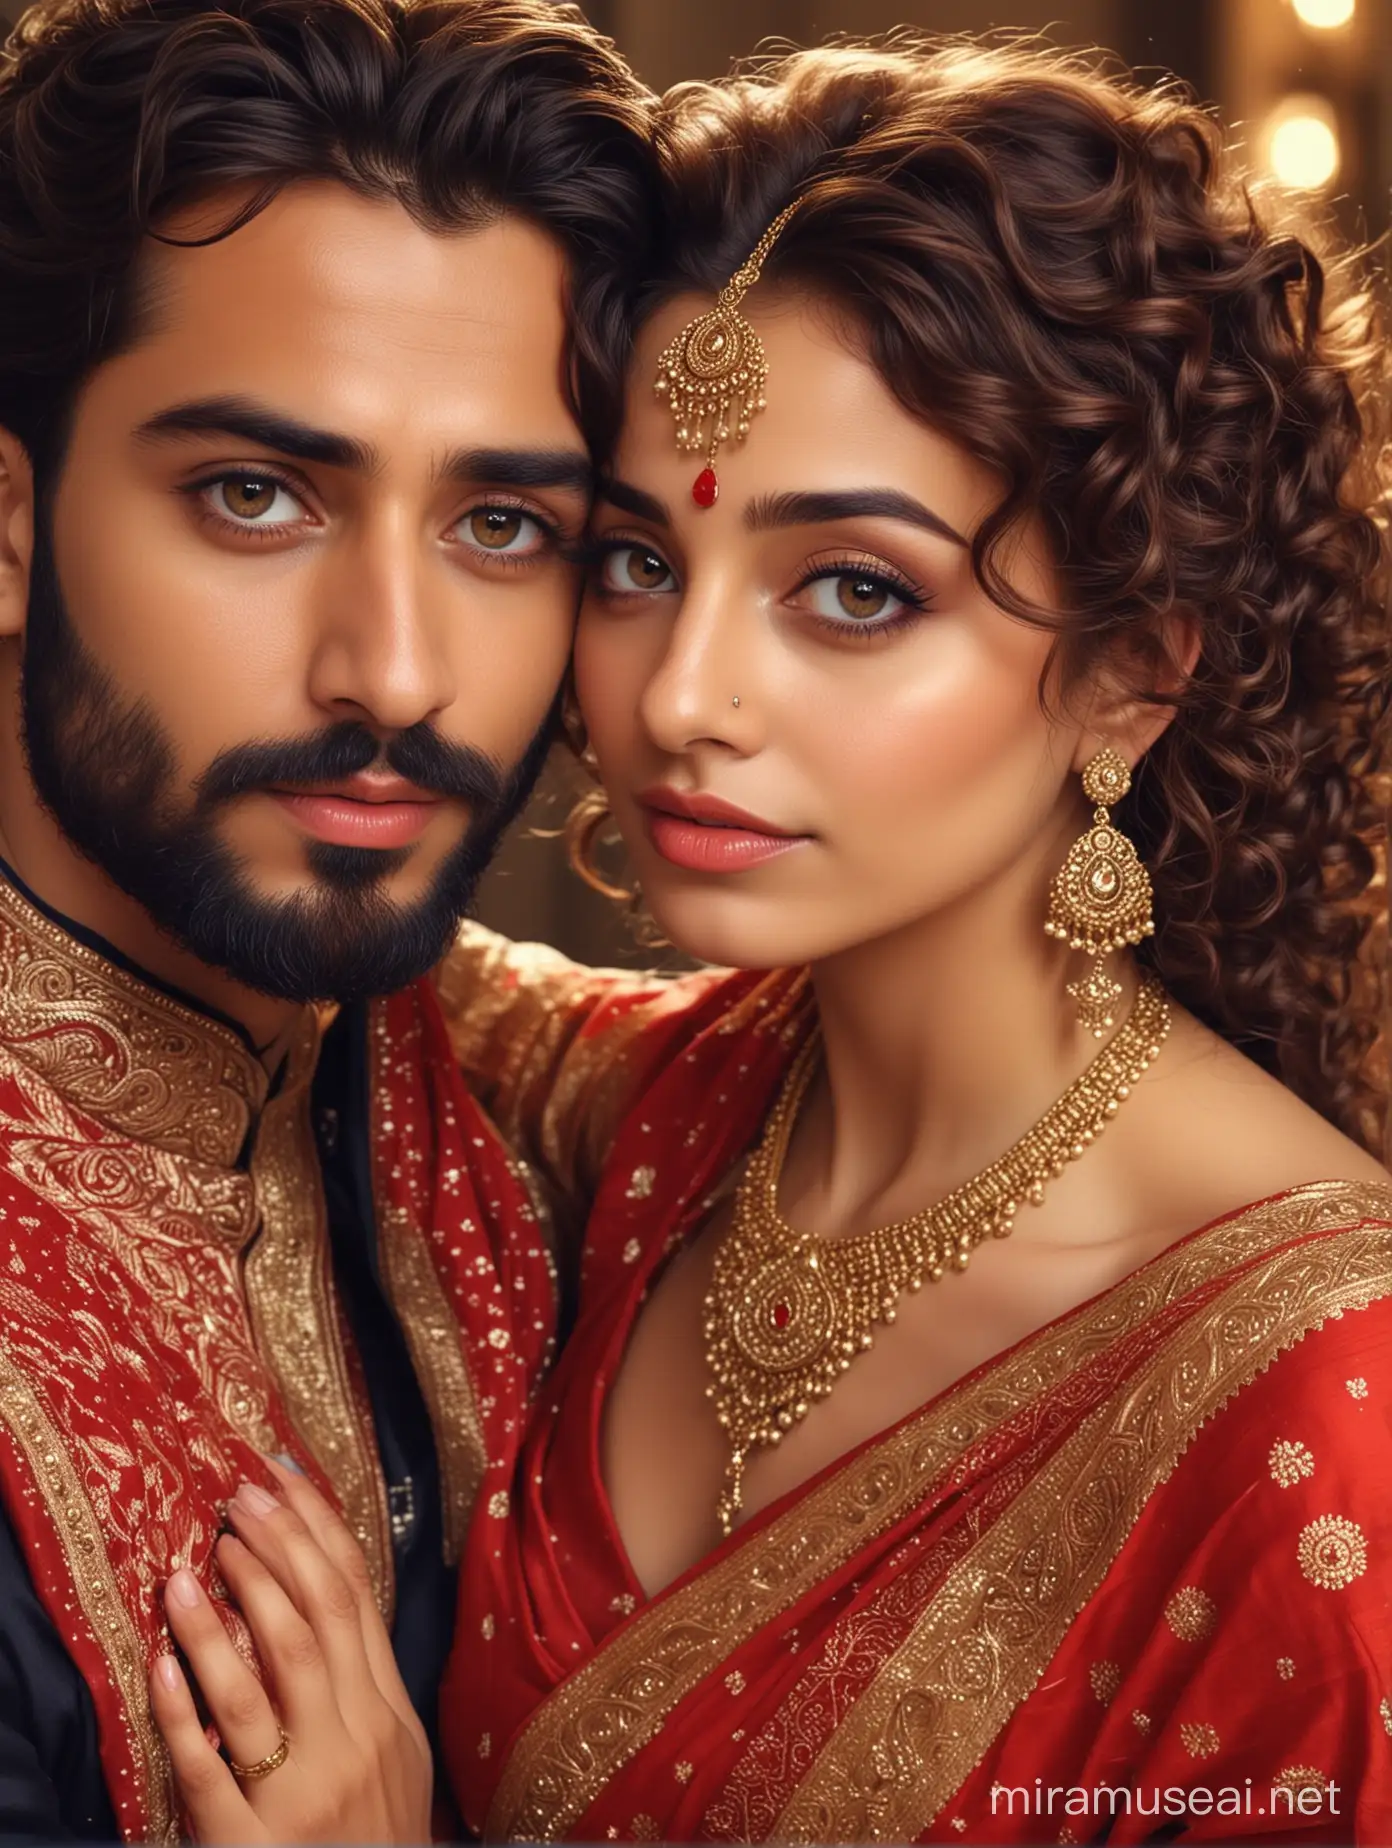 full photo portrait of most beautiful european couple as most beautiful indian couple, most beautiful girl in elegant color saree and thick long curly hairs, big wide eyes, full face, red dot, makeup, golden jewelry, man with stylish beard, man perfect short  hair cut, formals, girl embracing boy and resting  forehead  on boy shoulder in solace, photo realistic, 4k.